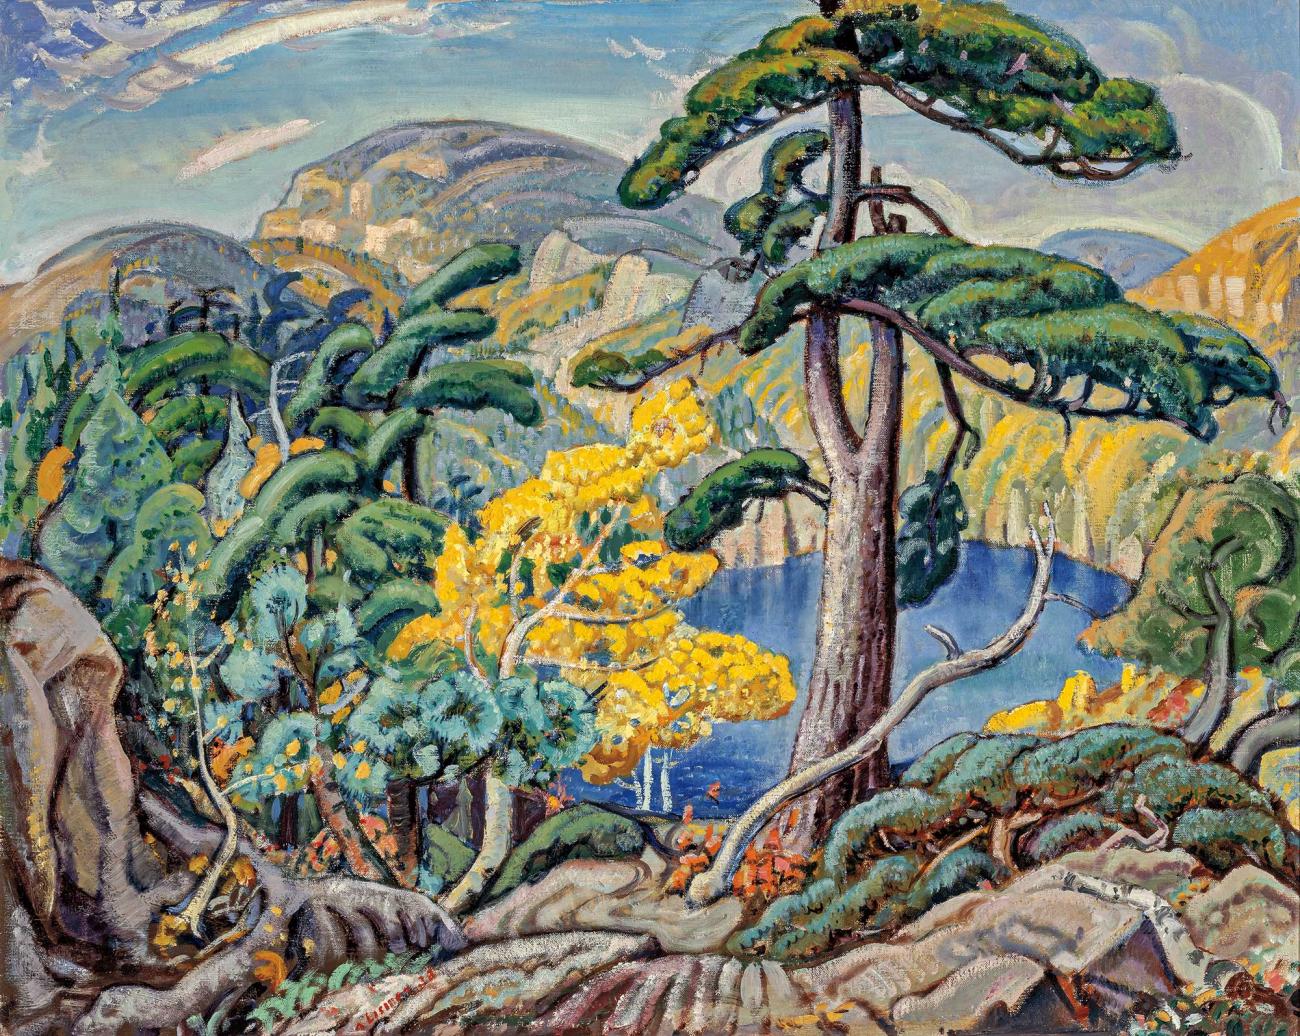 Colourful painting of trees with water and mountains in the background.